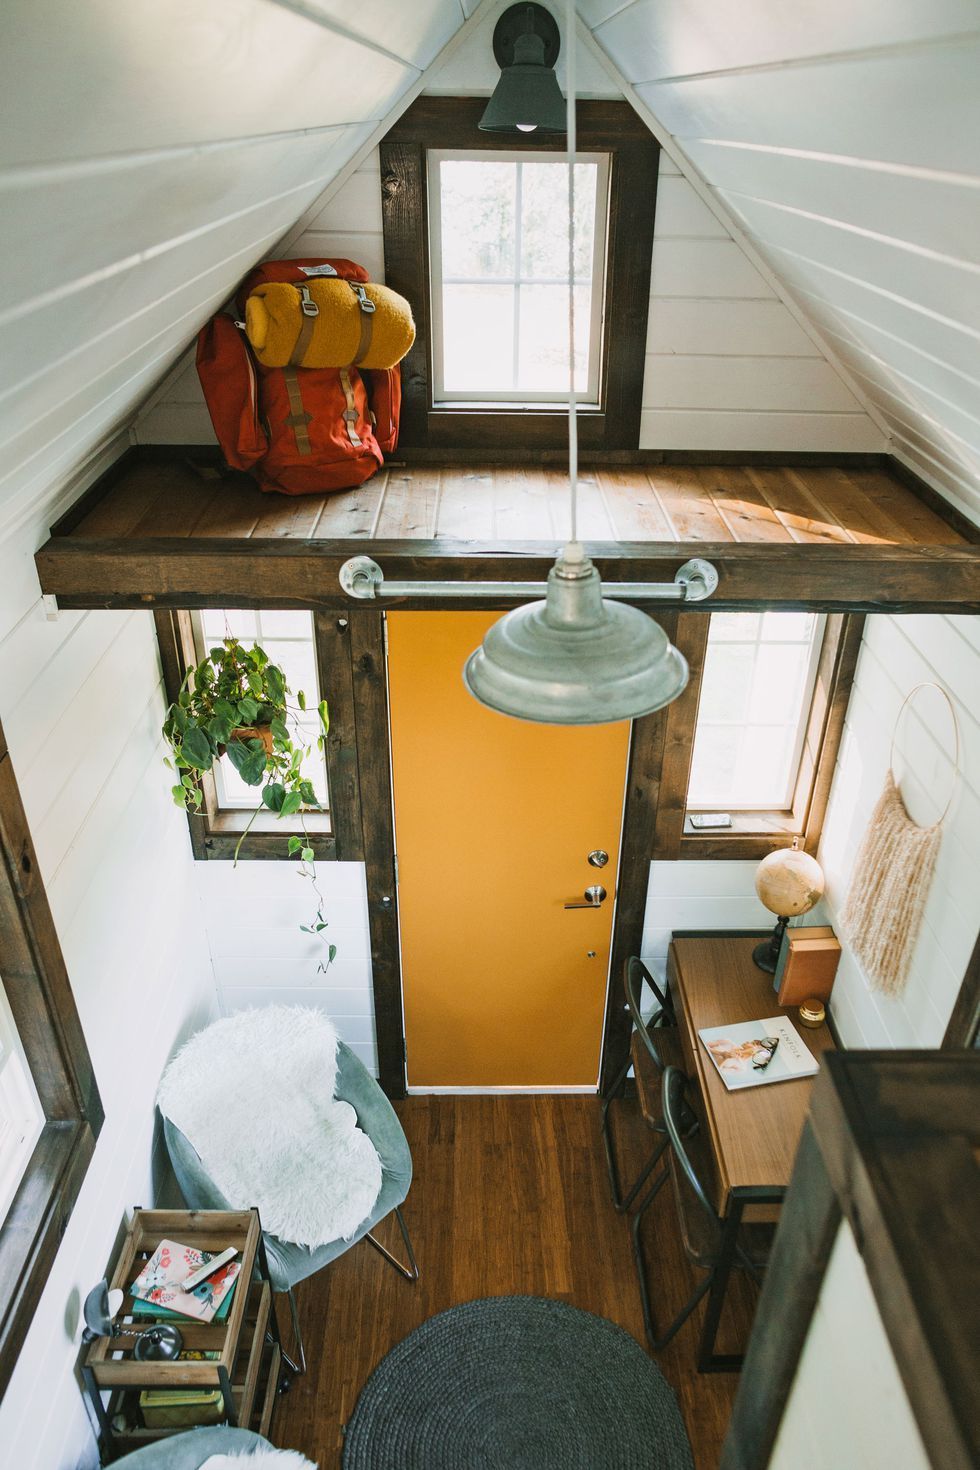 25 Tiny House Storage Ideas to Make the Most of Your Space